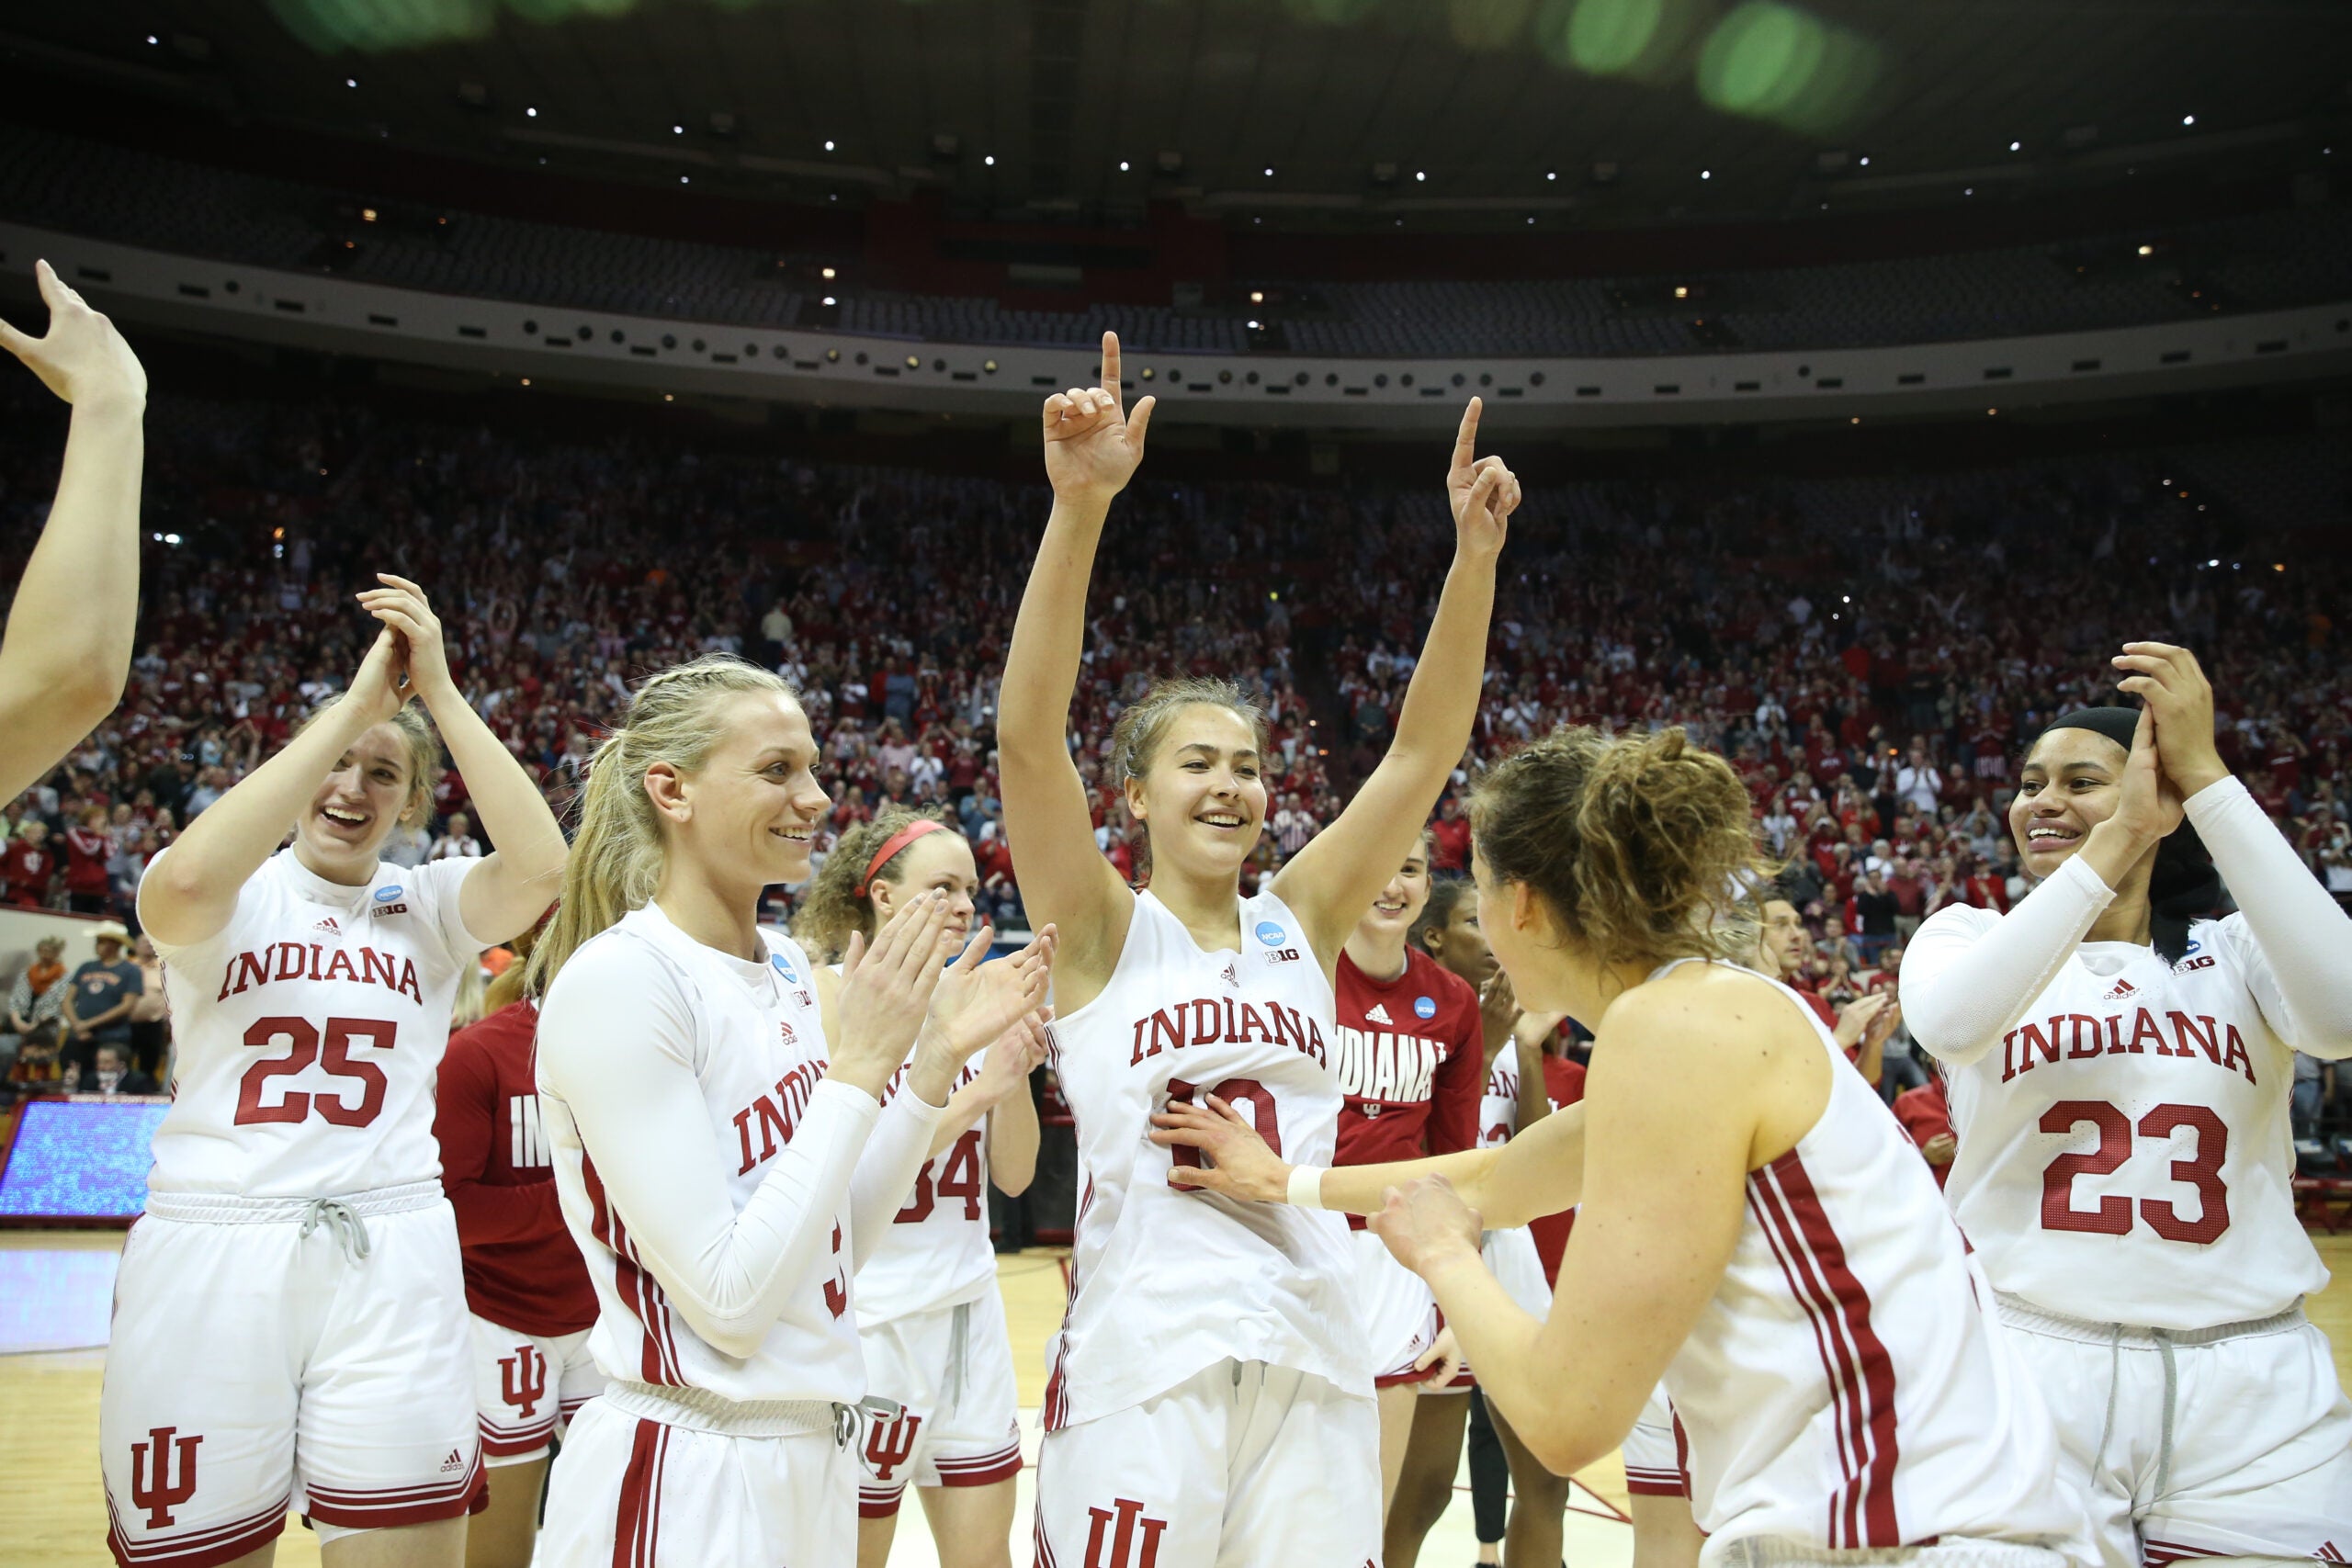 The Hoosiers earned their highest-ever placement in the NCAA Tournament with a No. 3 seed in 2022.